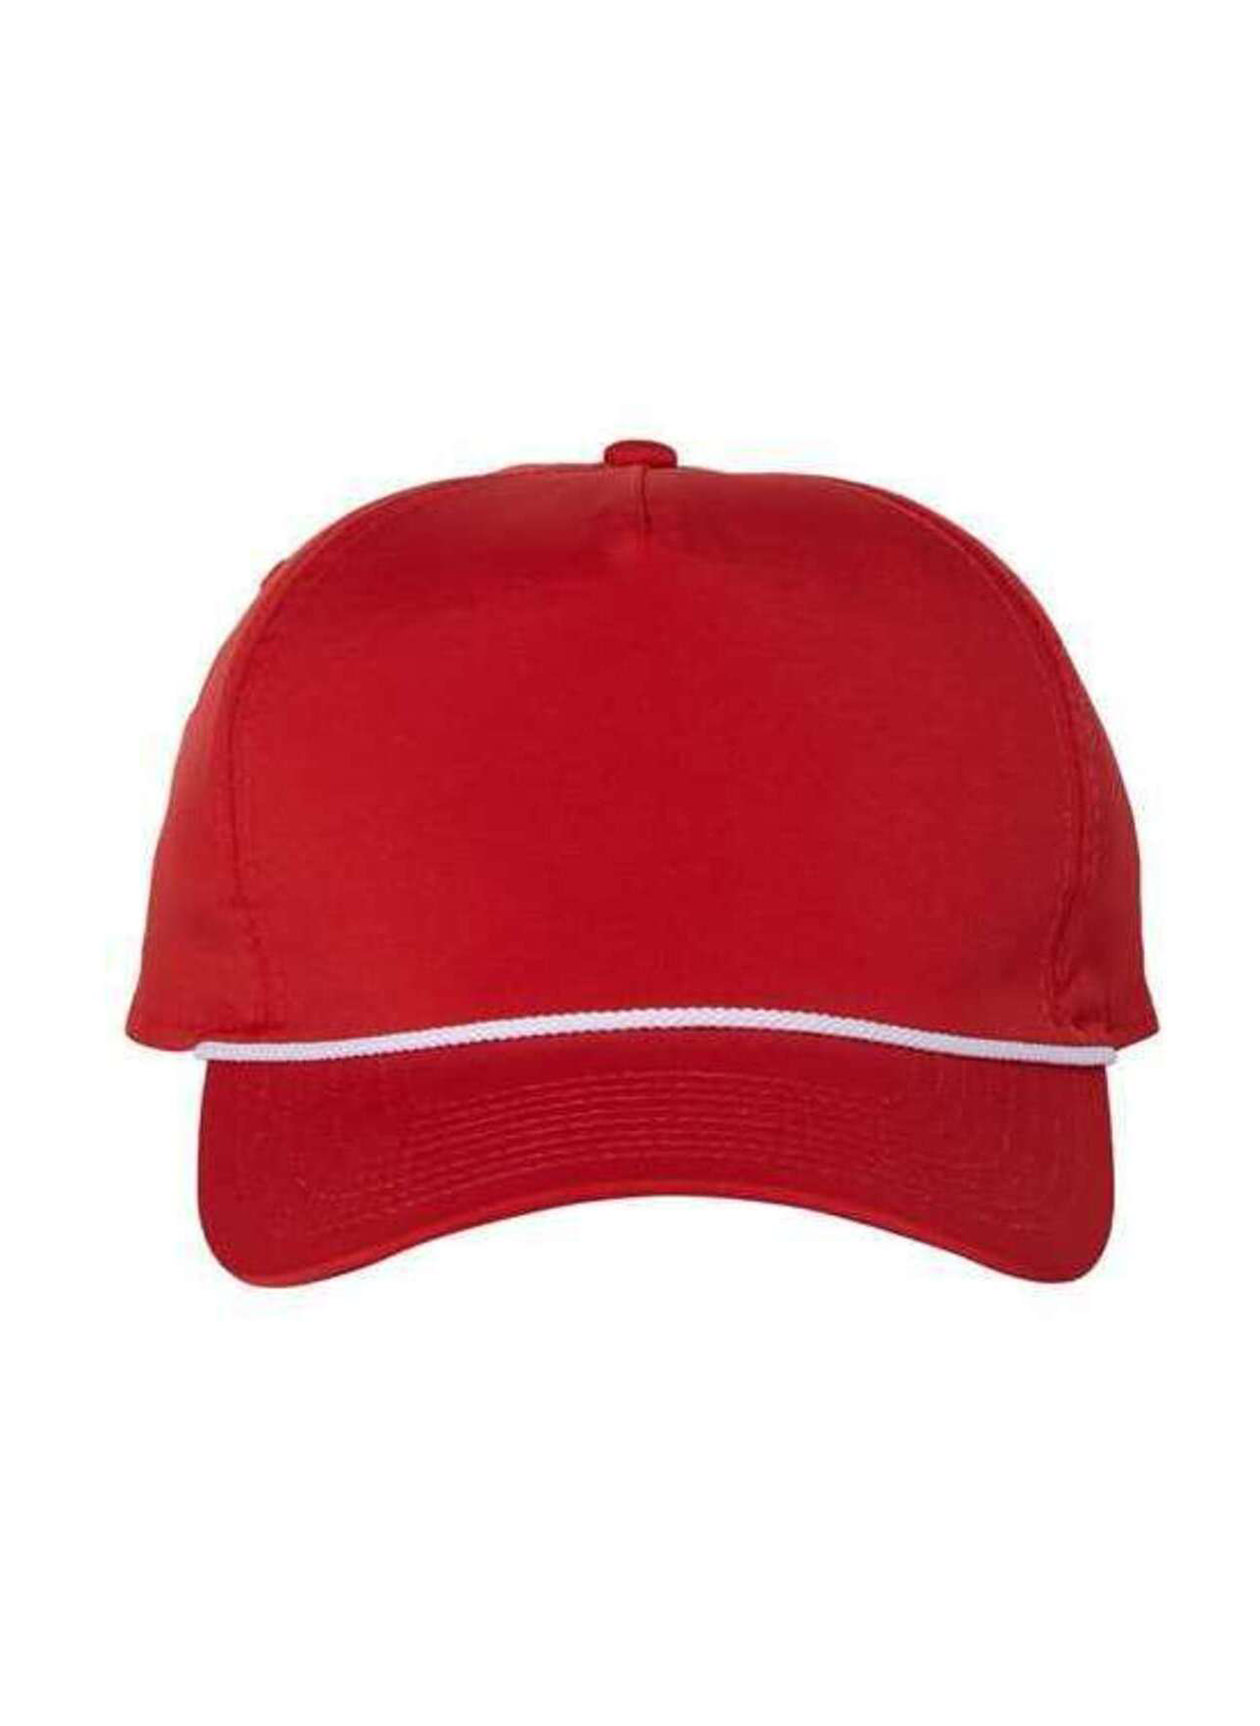 Imperial Red / White The Wrightson Performance Rope Hat